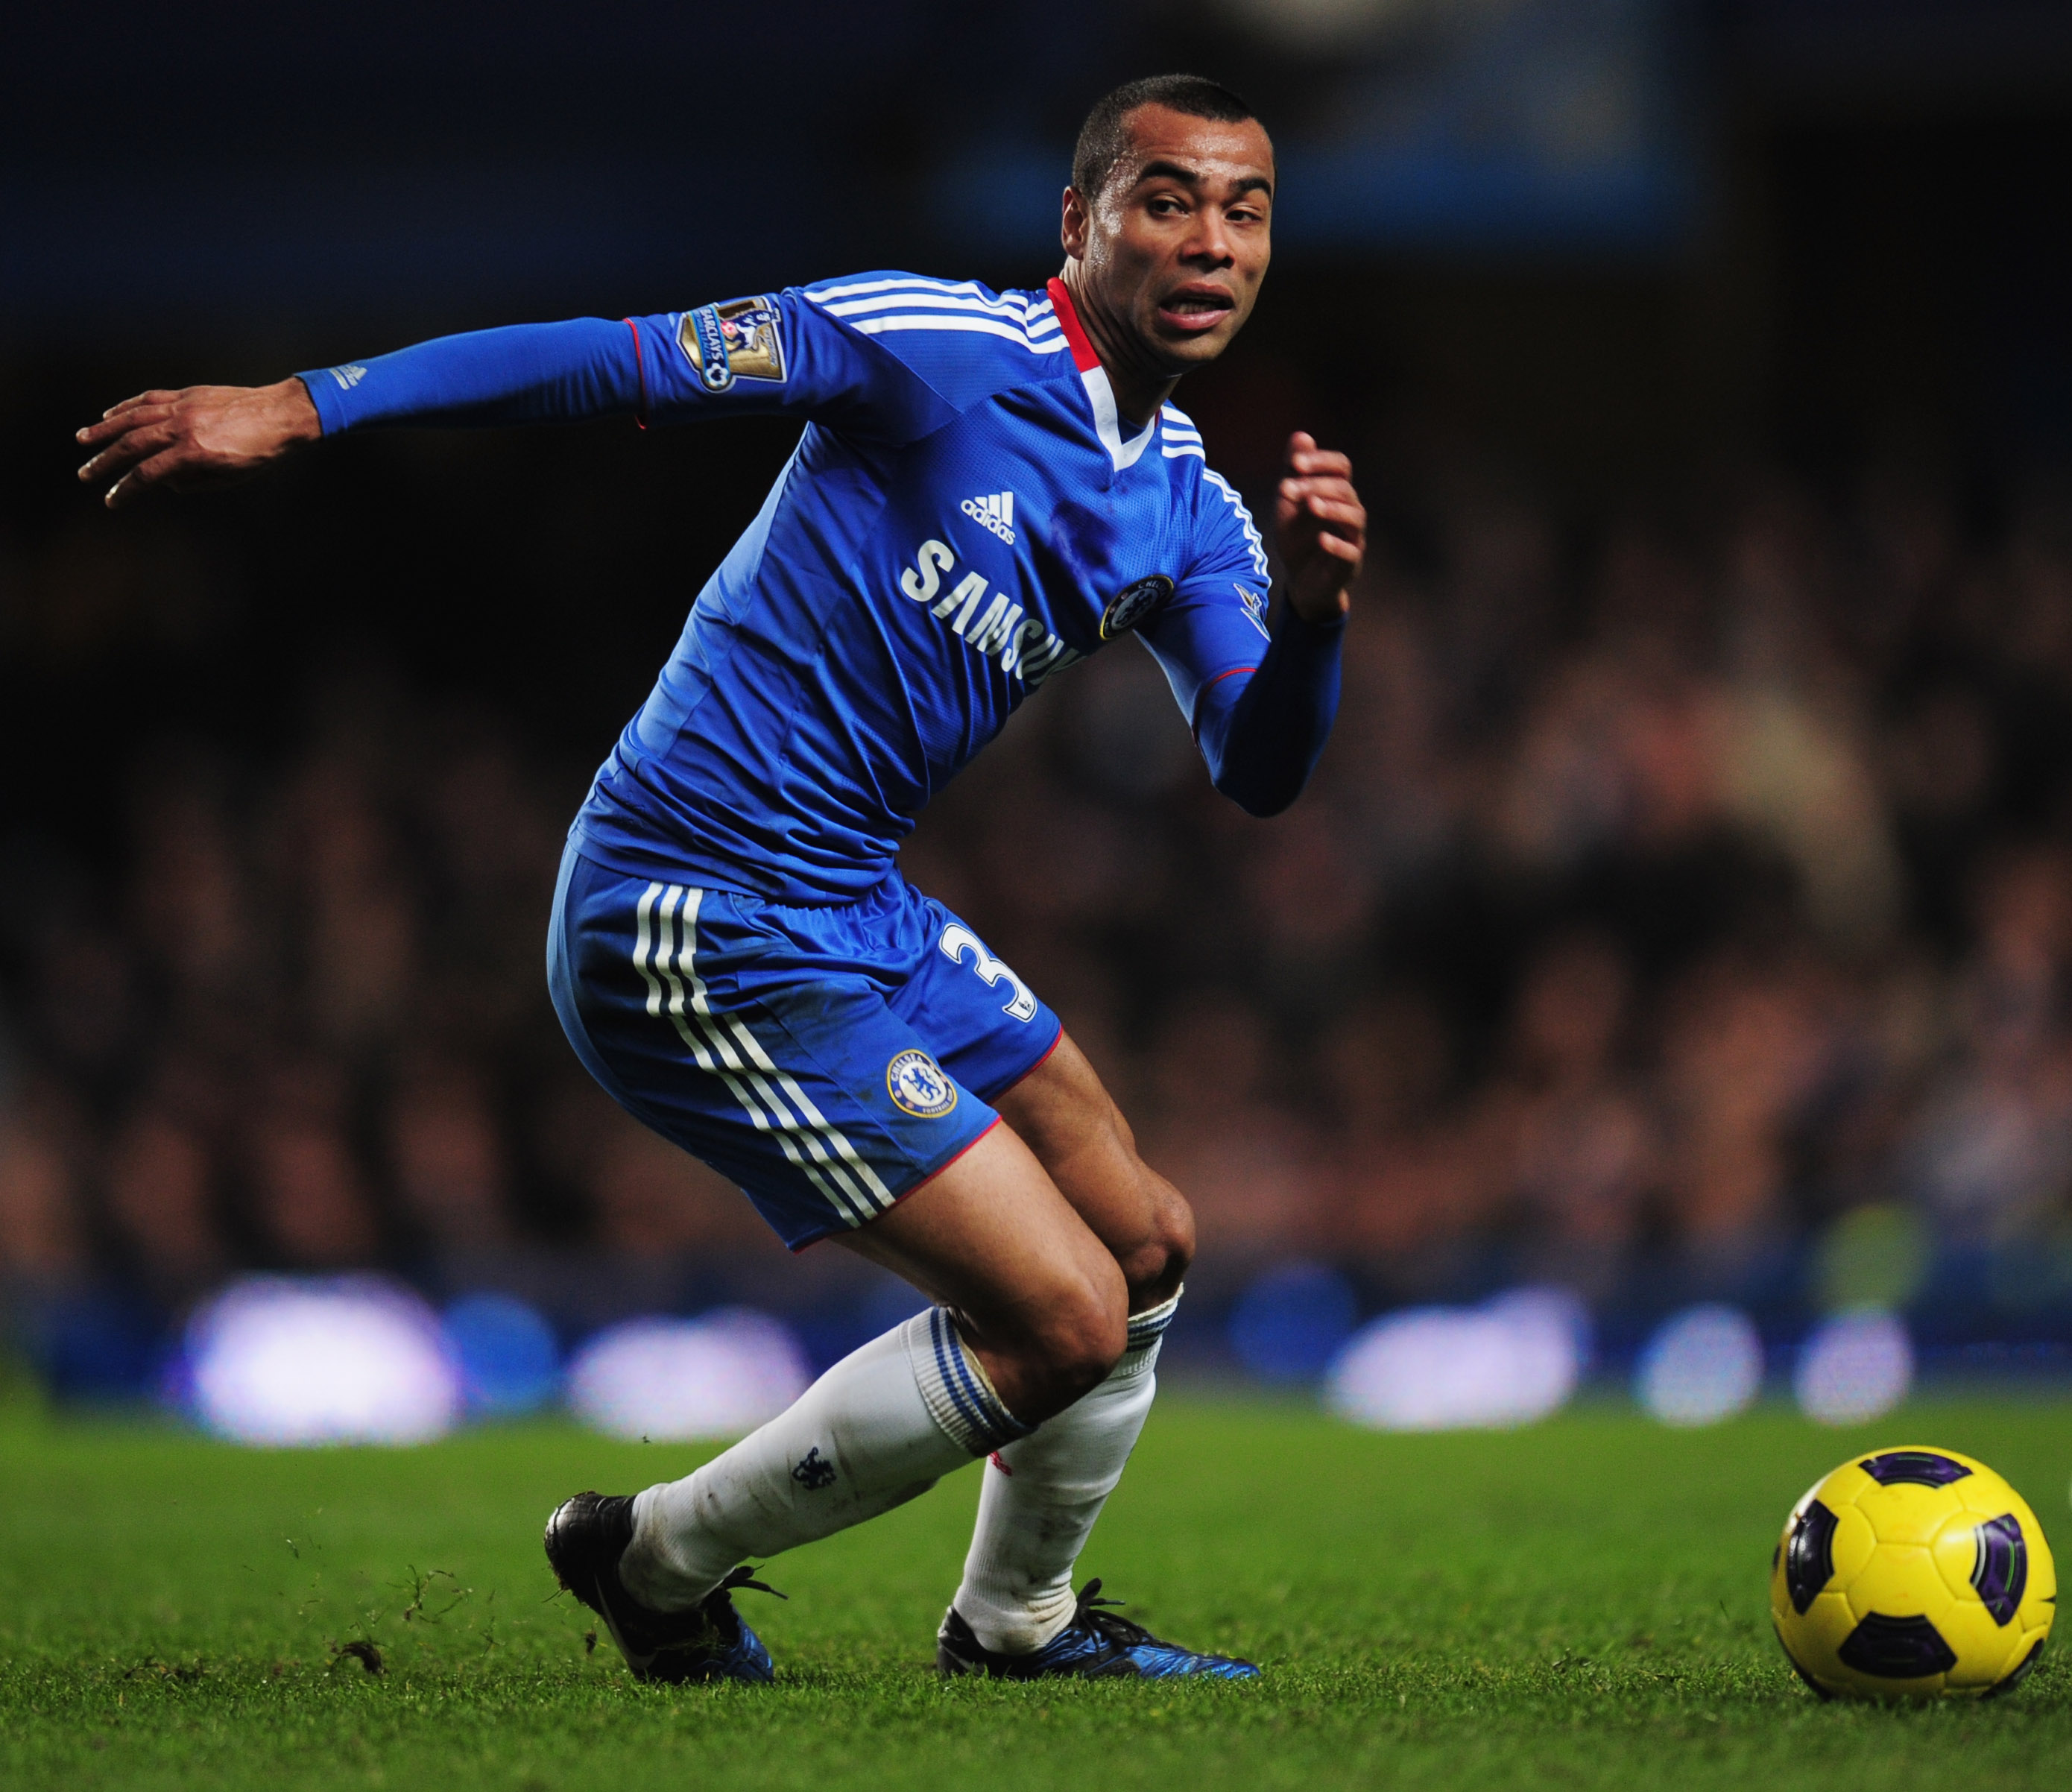 LONDON, ENGLAND - DECEMBER 04:  Ashley Cole of Chelsea in action during the Barclays Premier League match between Chelsea and Everton at Stamford Bridge on December 4, 2010 in London, England.  (Photo by Shaun Botterill/Getty Images)